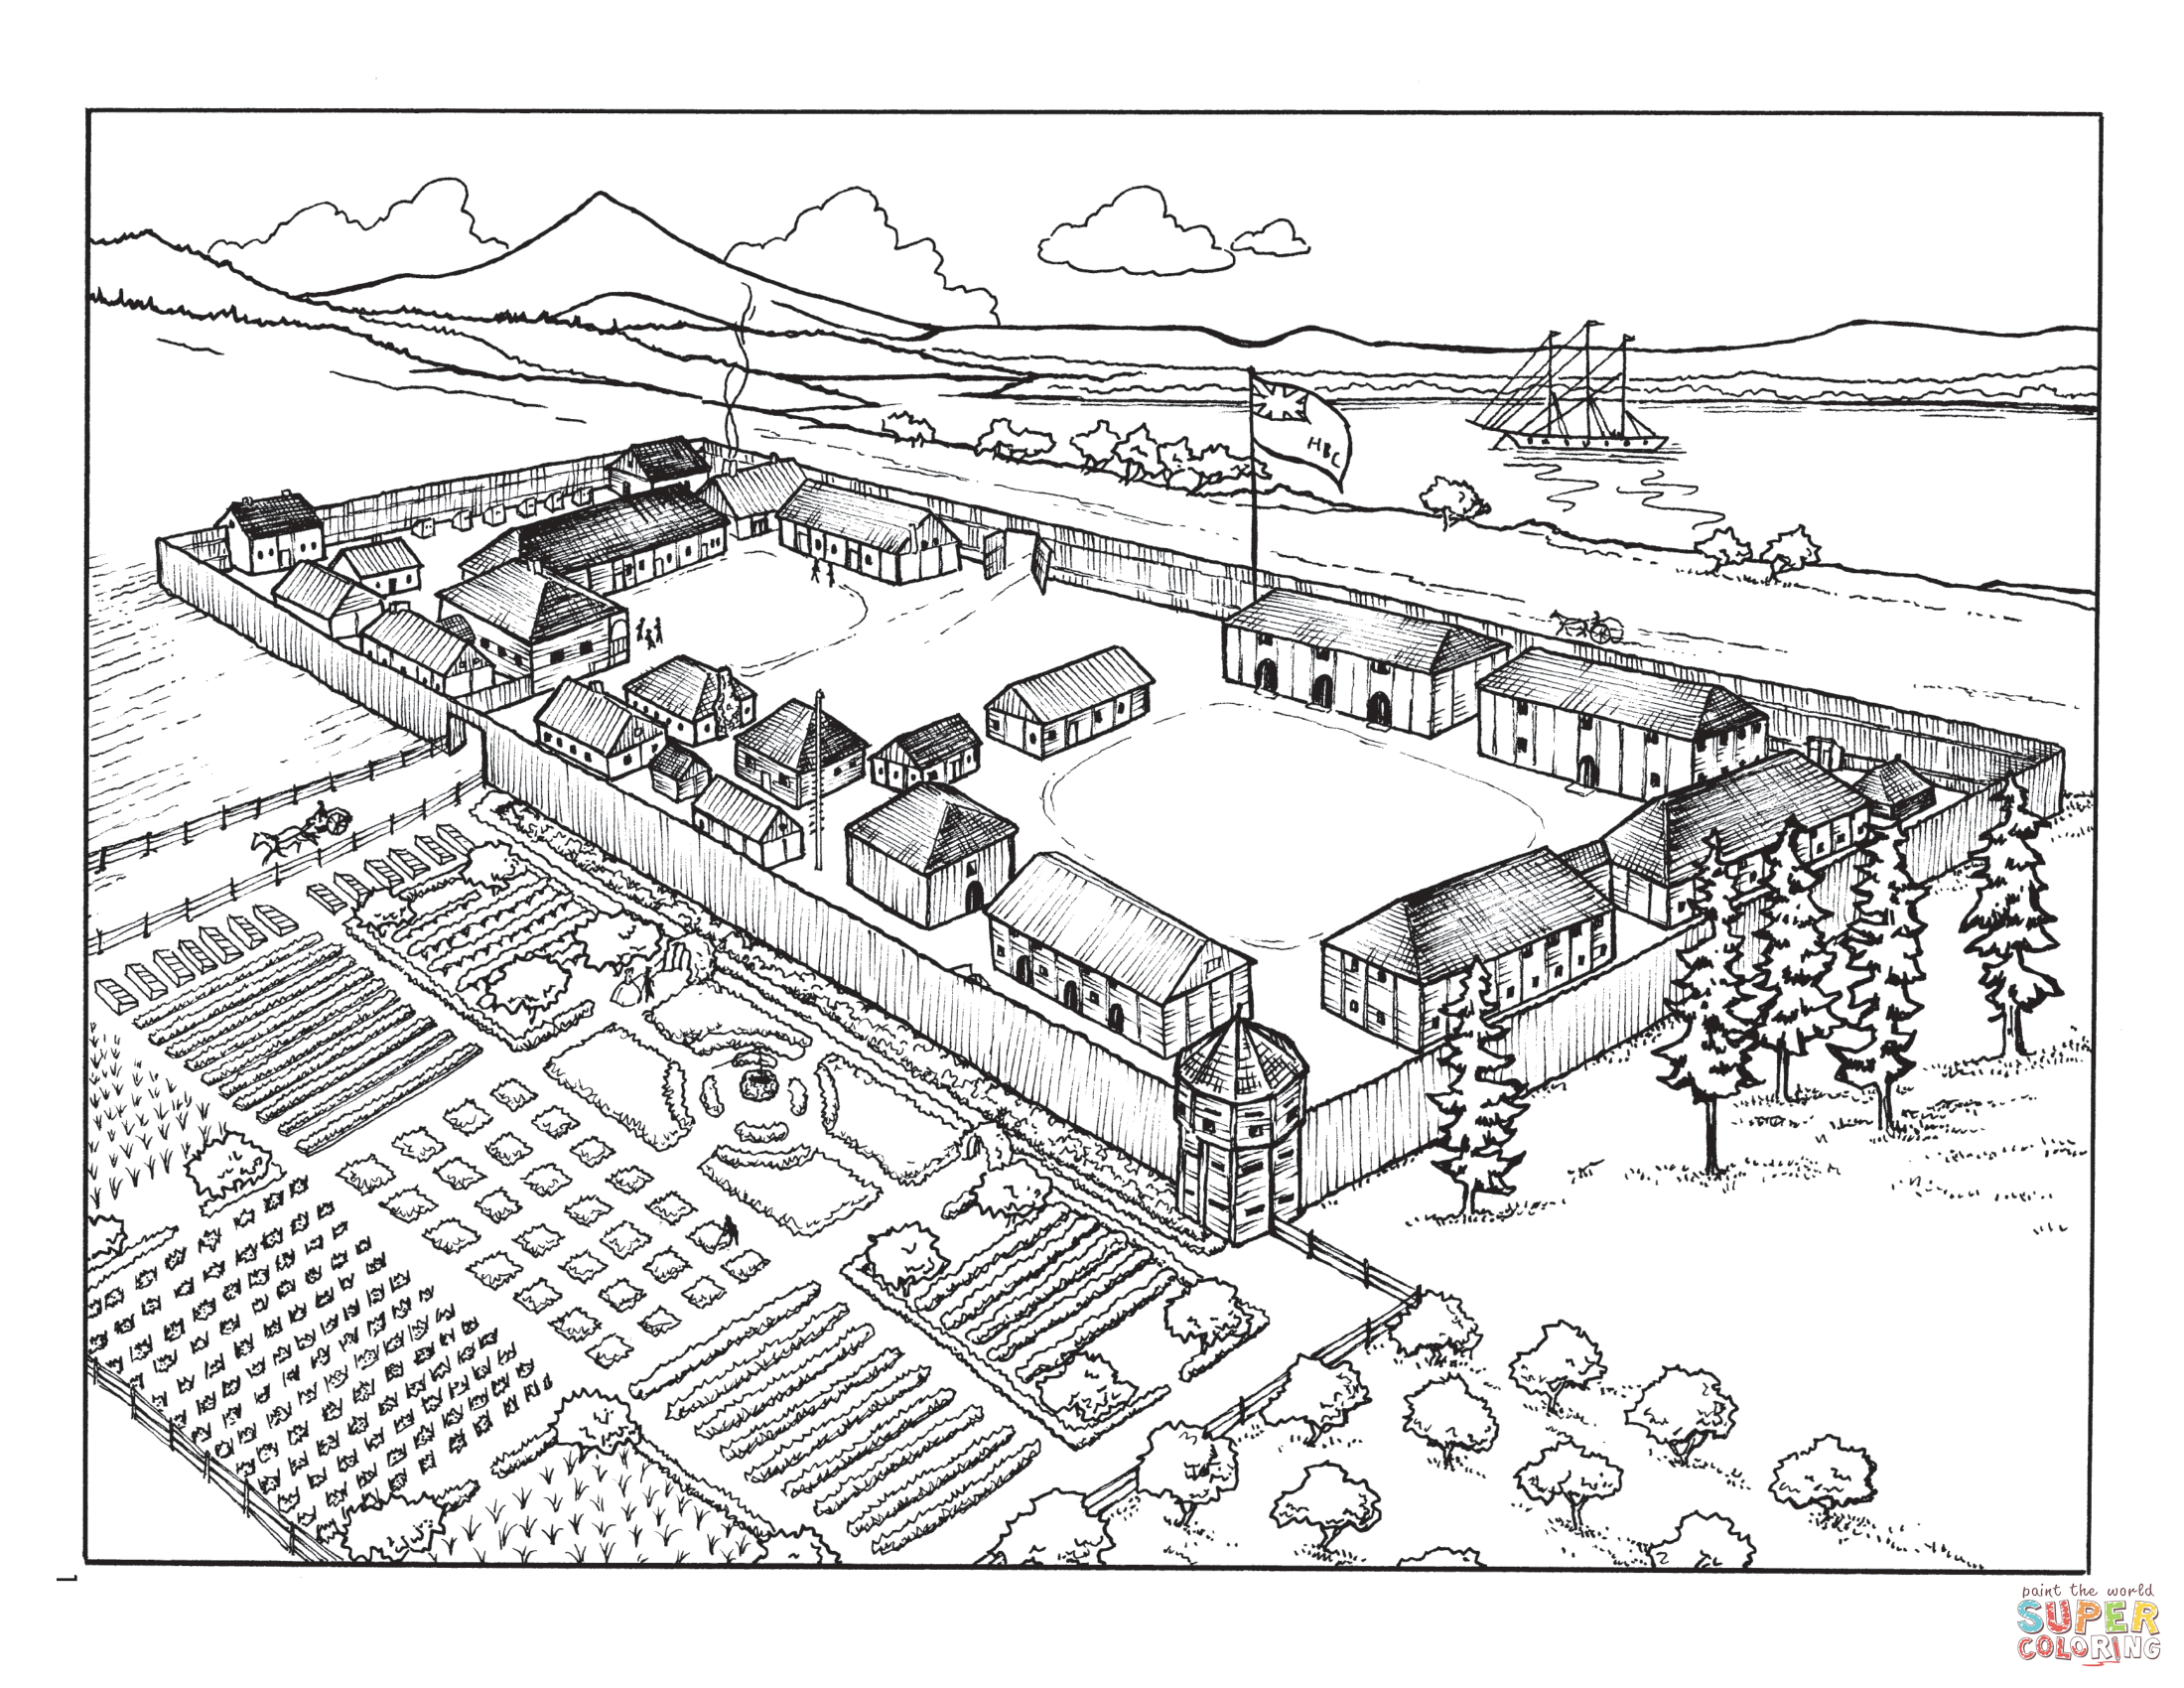 Fort vancouver aerial view coloring page free printable coloring pages